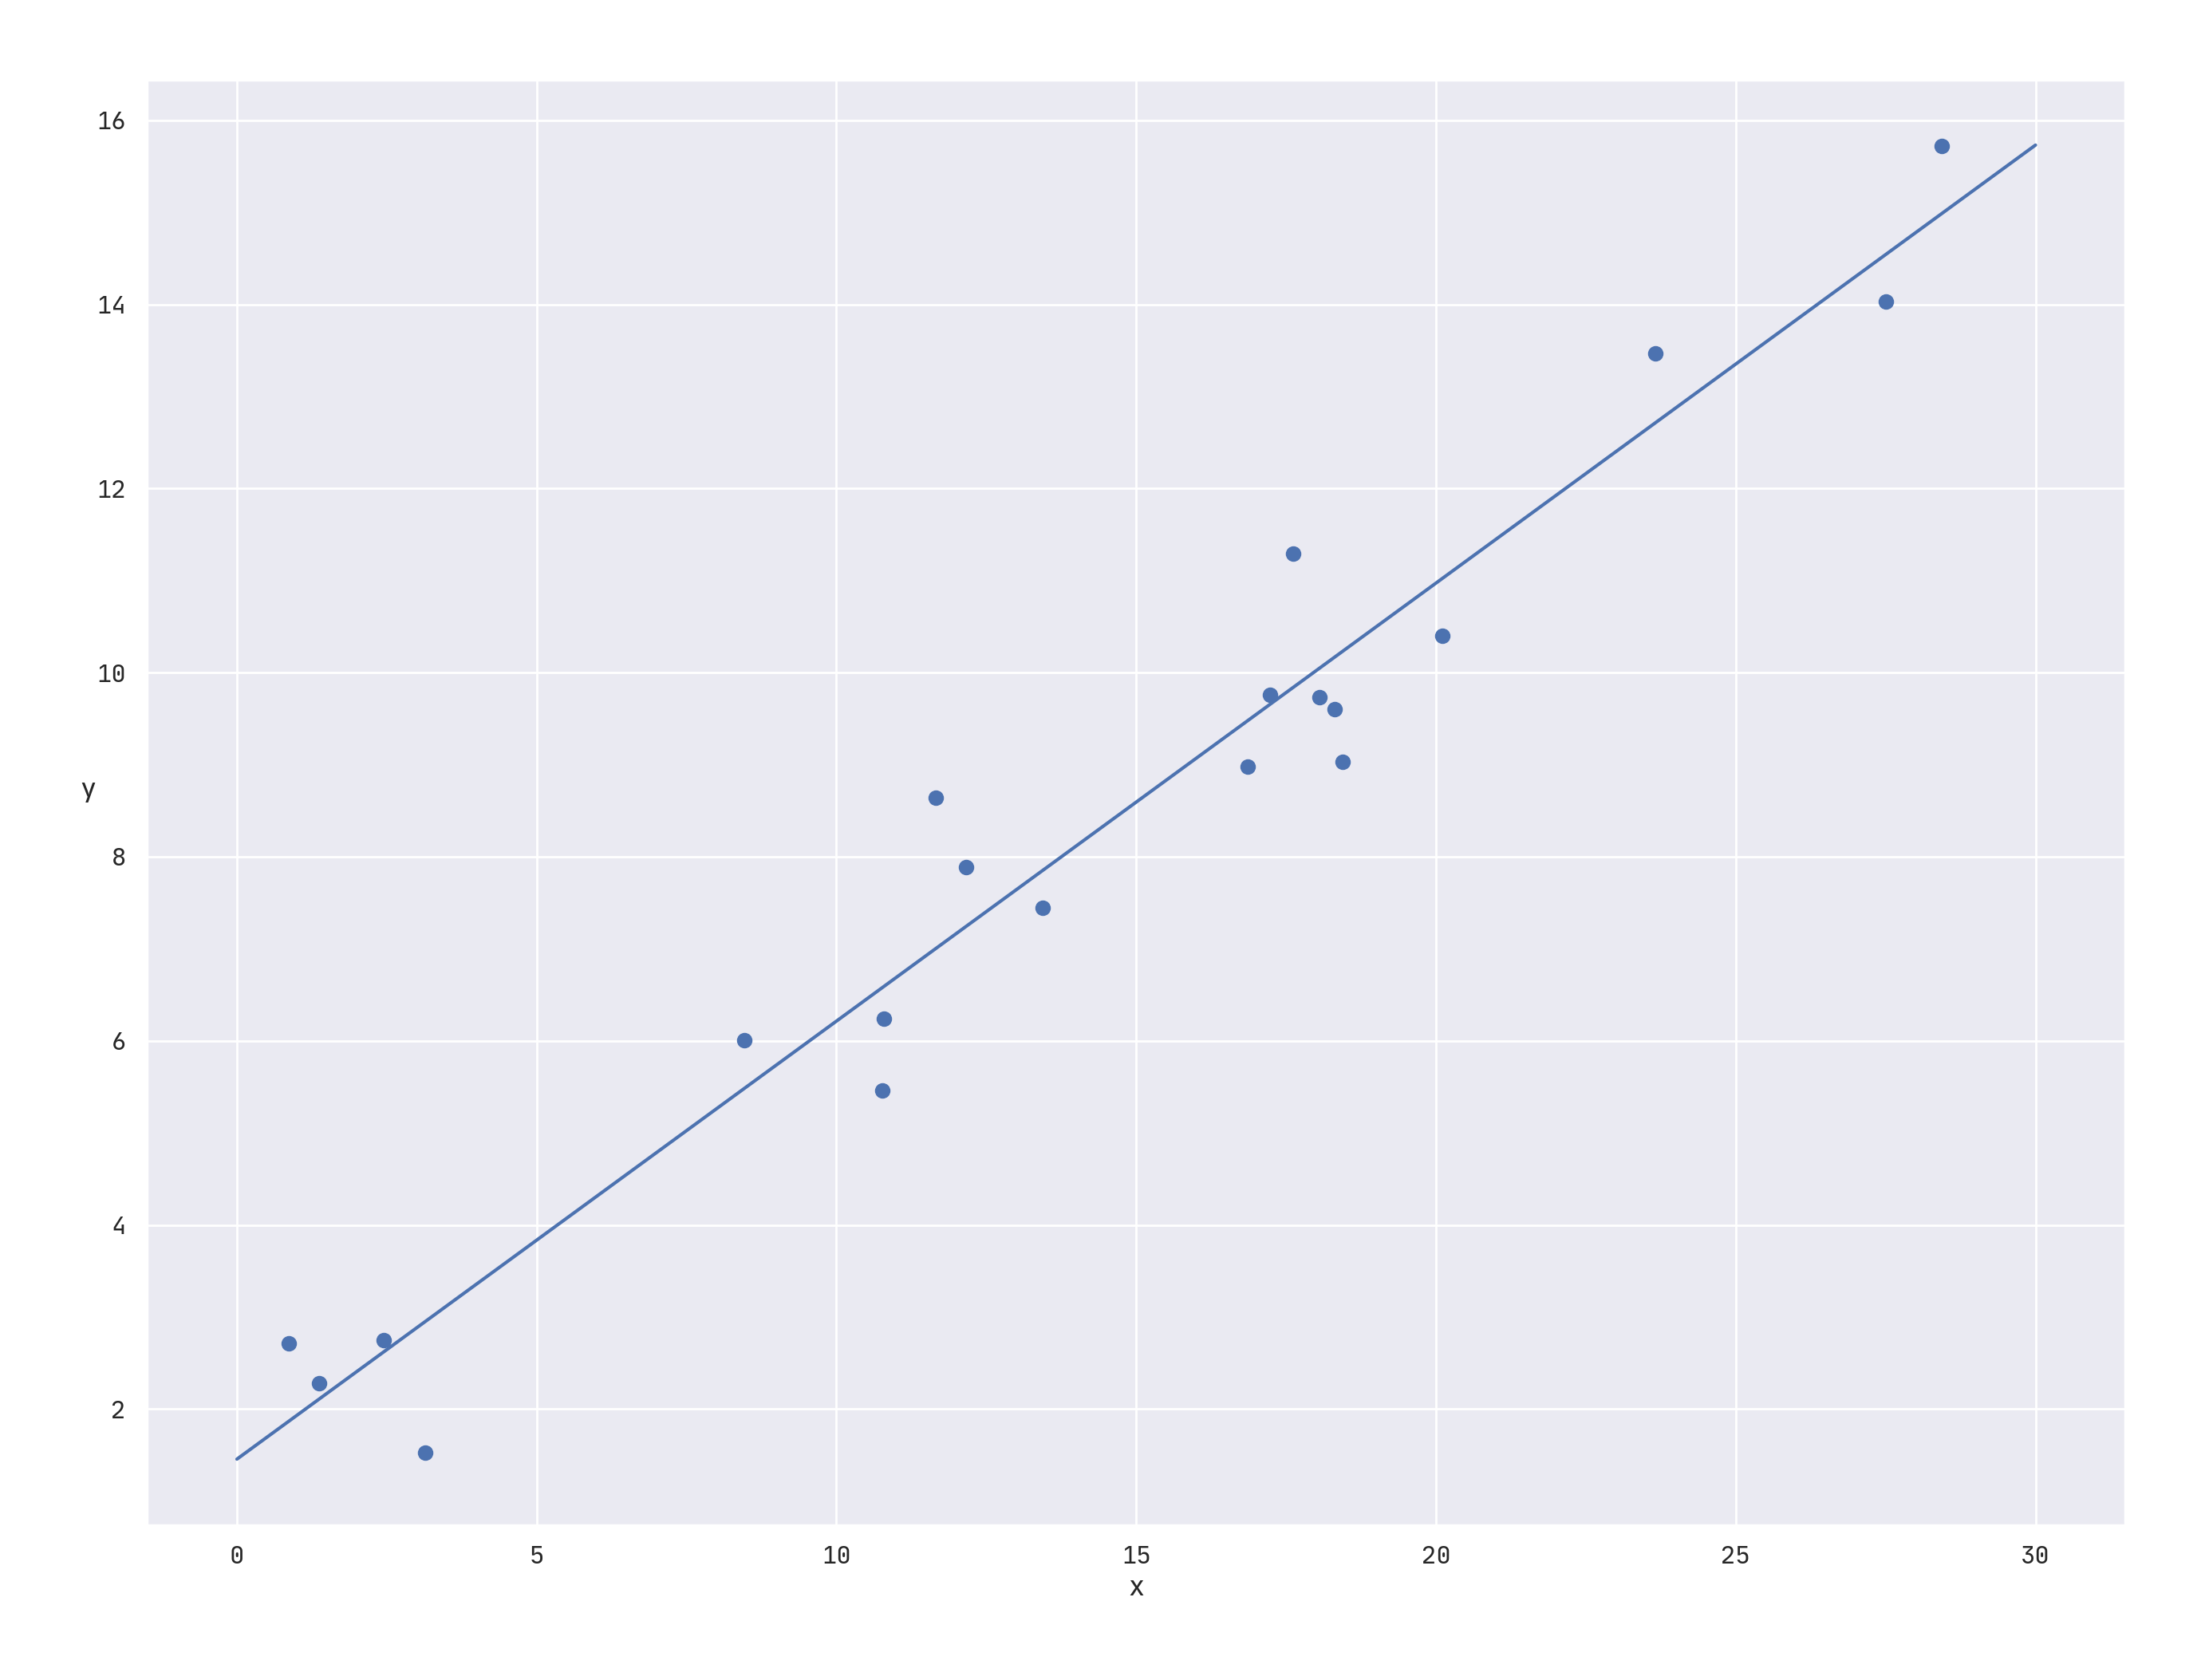 Deliberately Overfitting your model